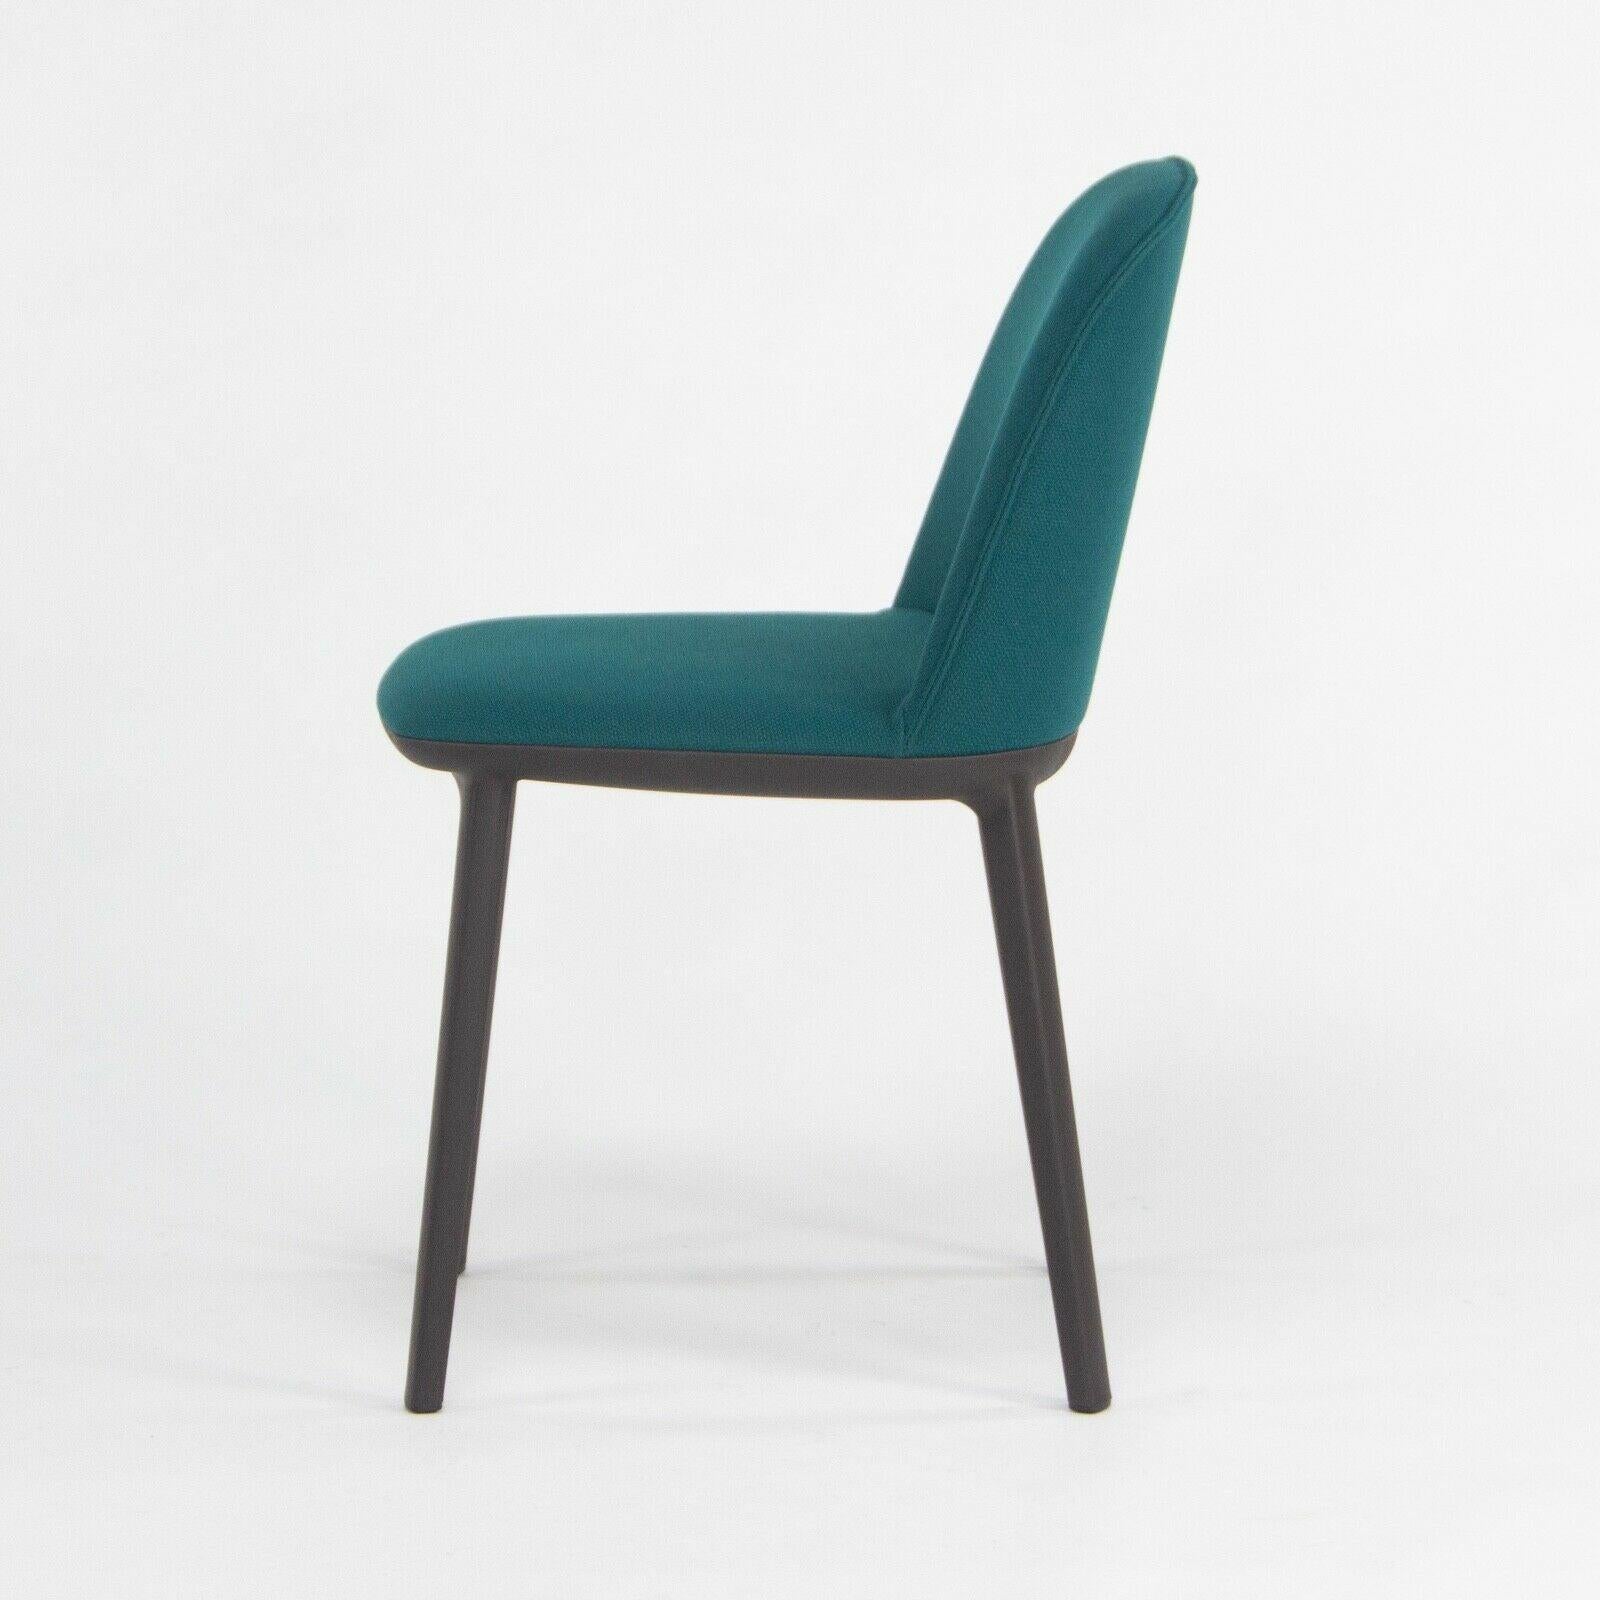 Swiss 2019 Vitra Softshell Side Chair w/ Teal Blue Fabric by Ronan & Erwan Bouroullec For Sale